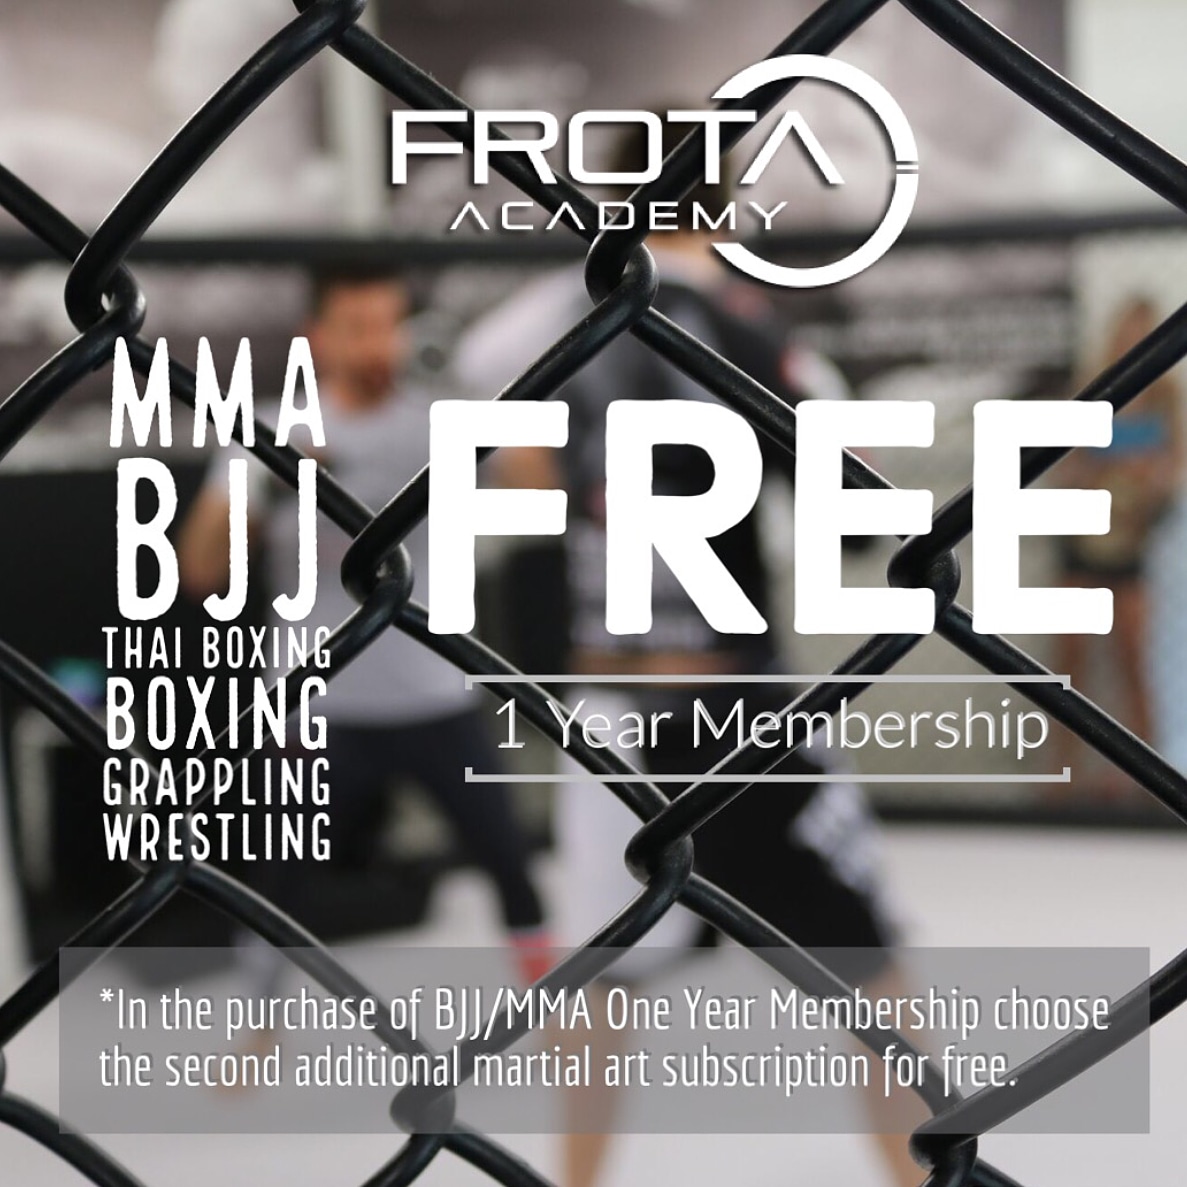 Get your 1 year free membership today